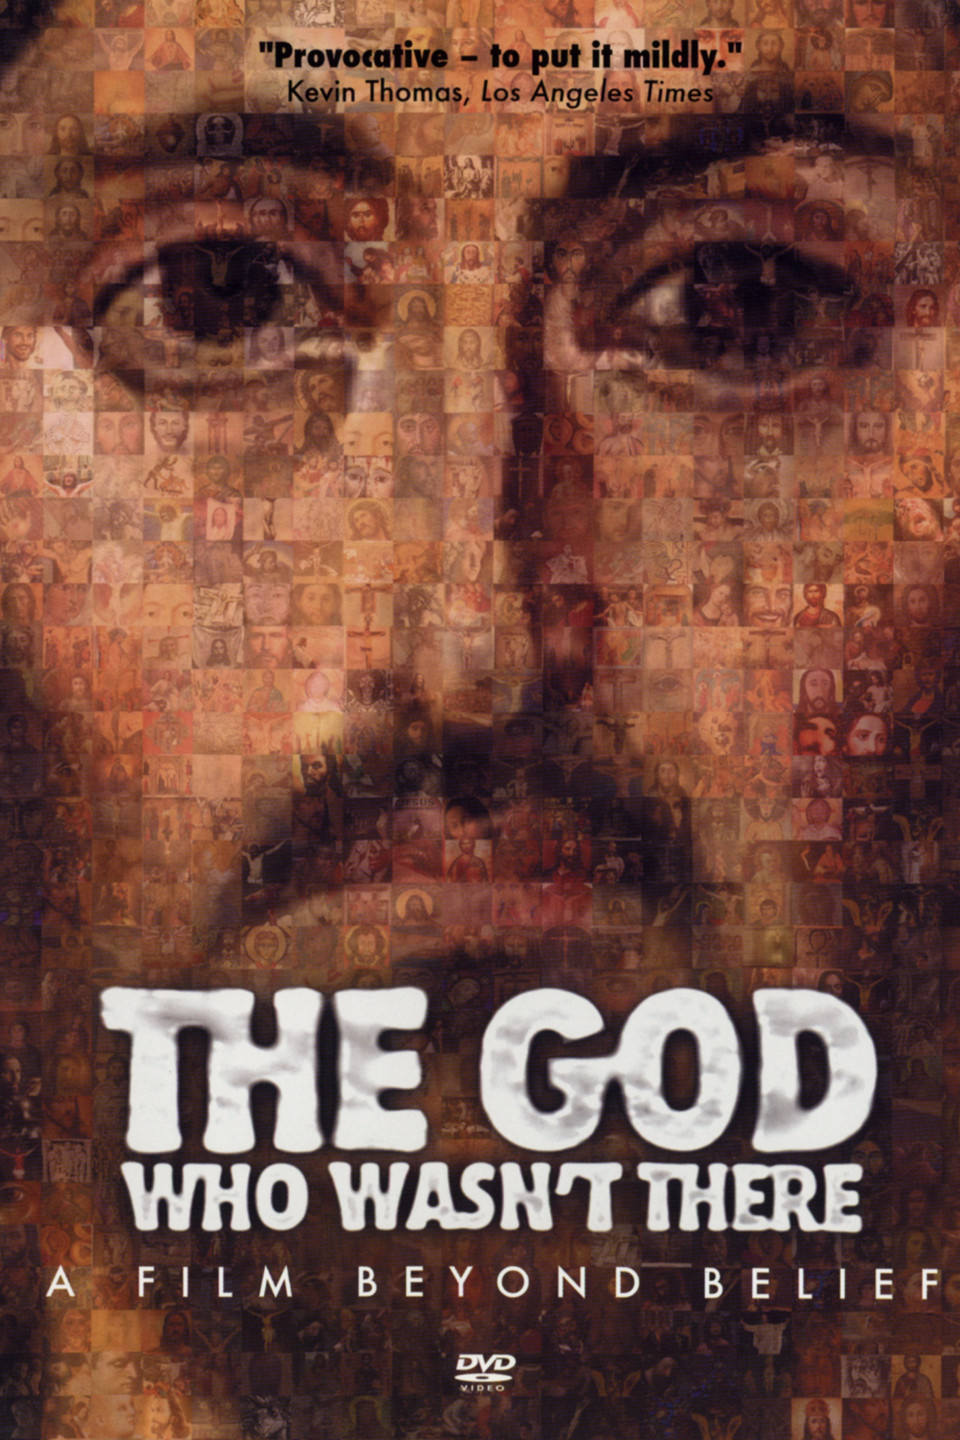 The God Who Wasnt There (DVD, 2005)